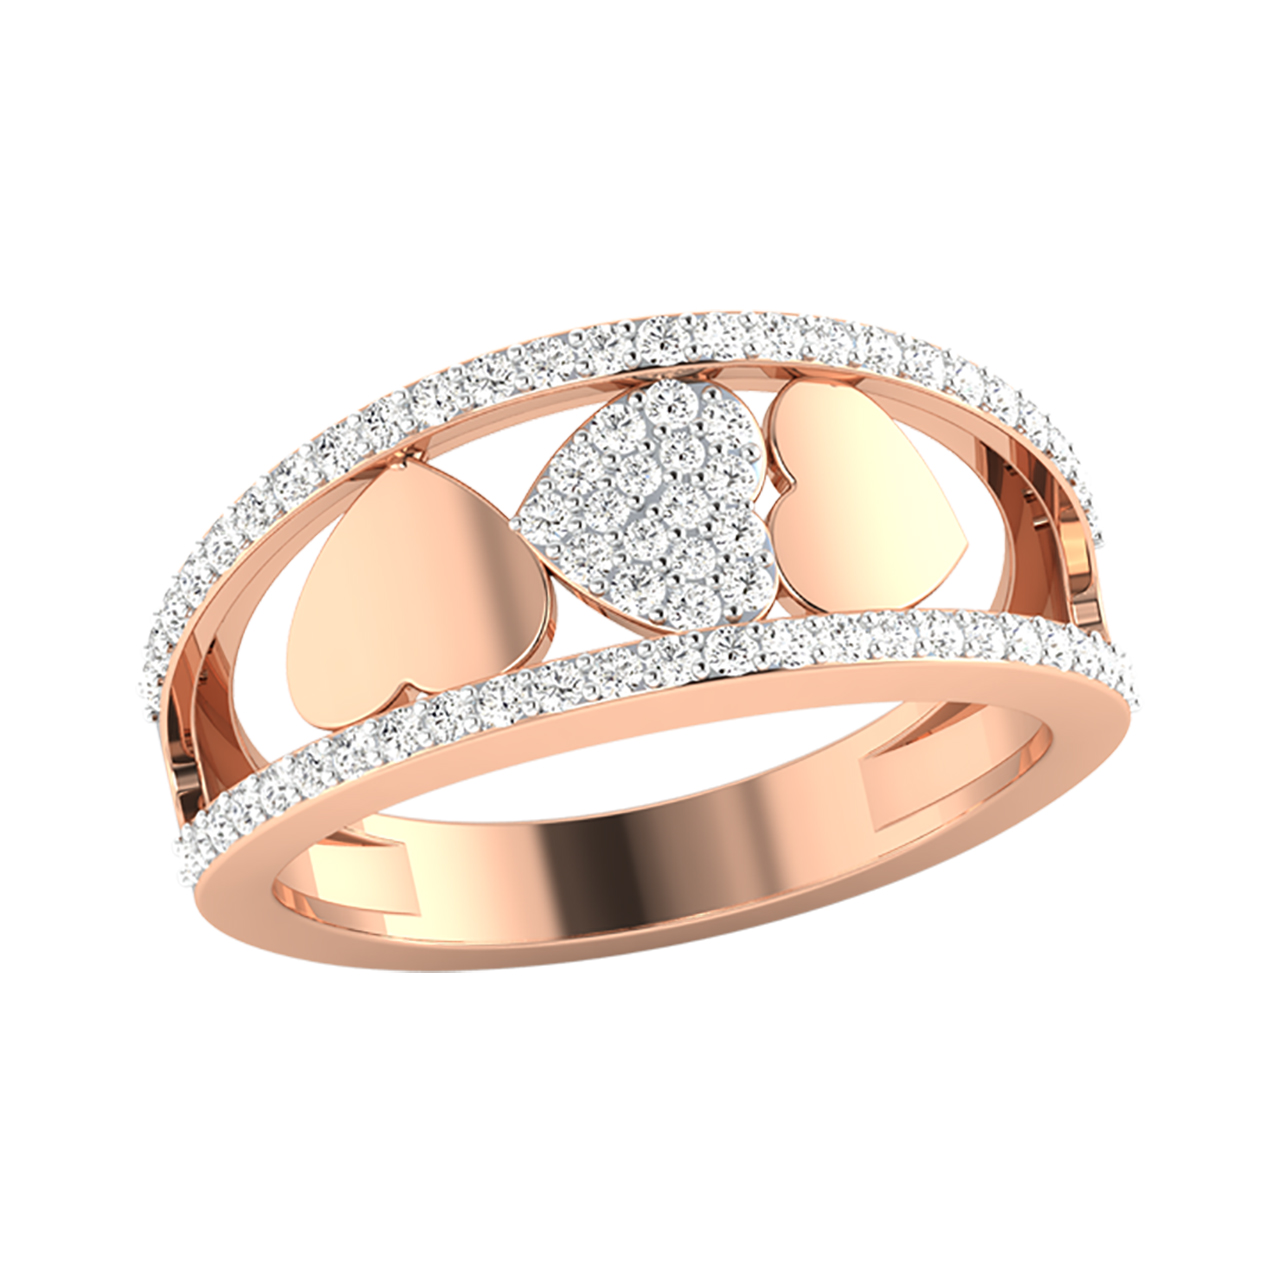 3 Hearts Engagement Ring